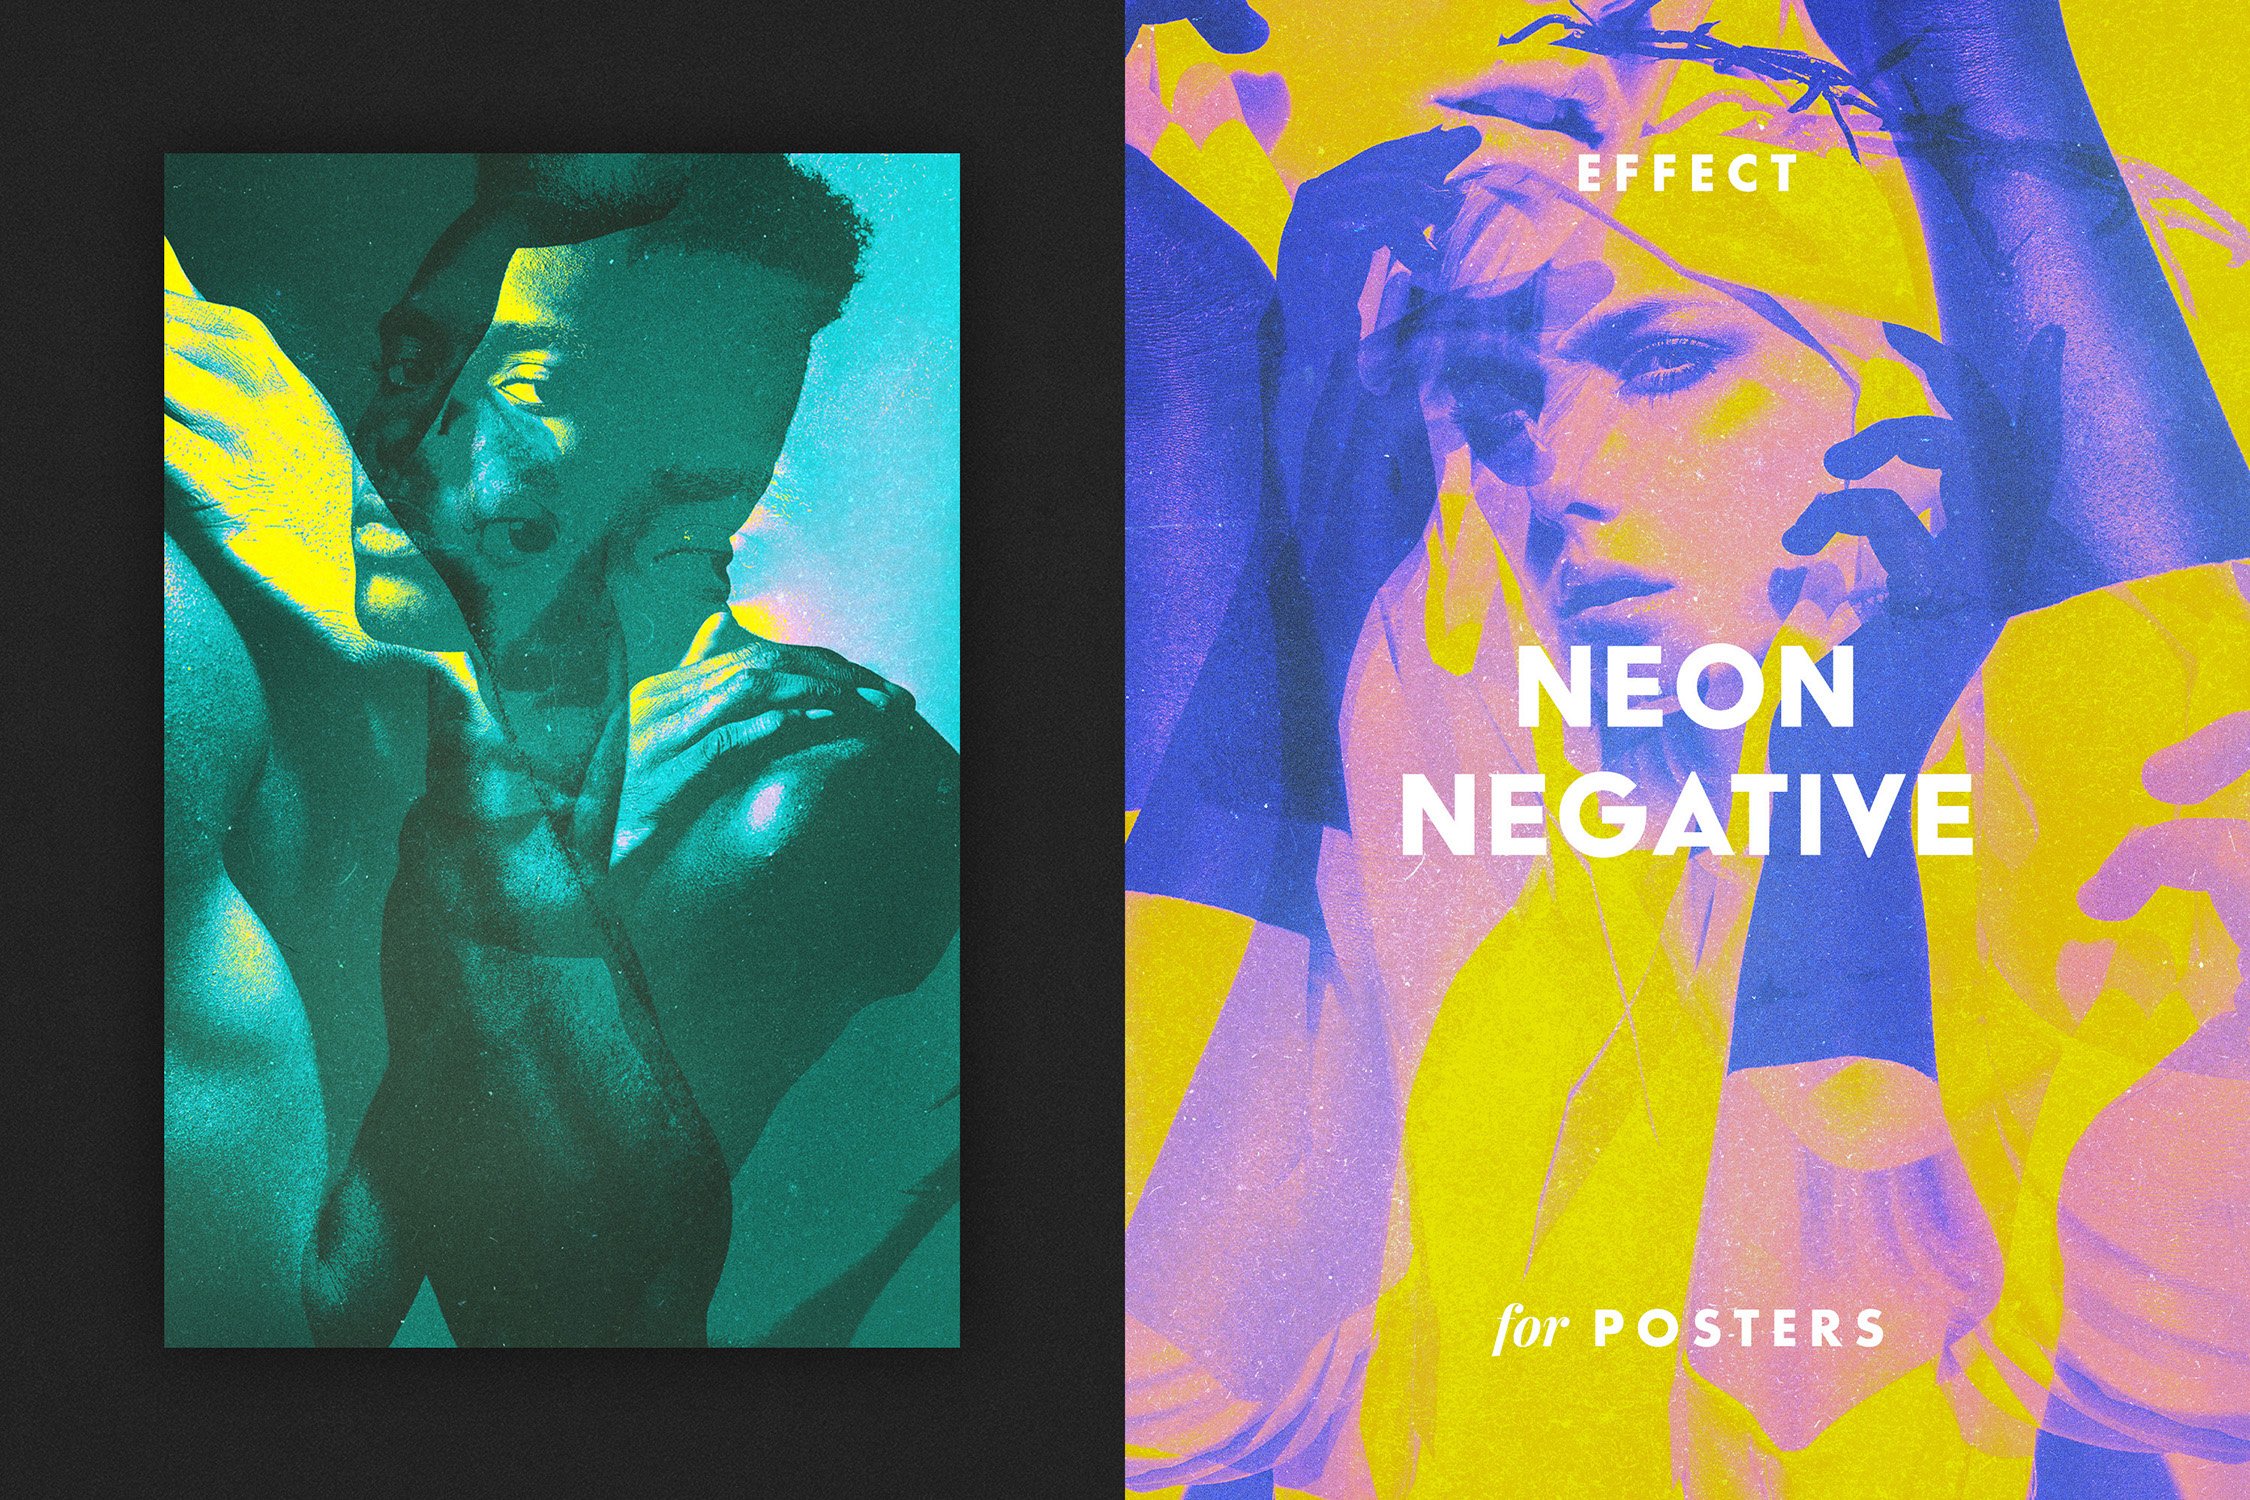 Neon Negative Poster Effectcover image.